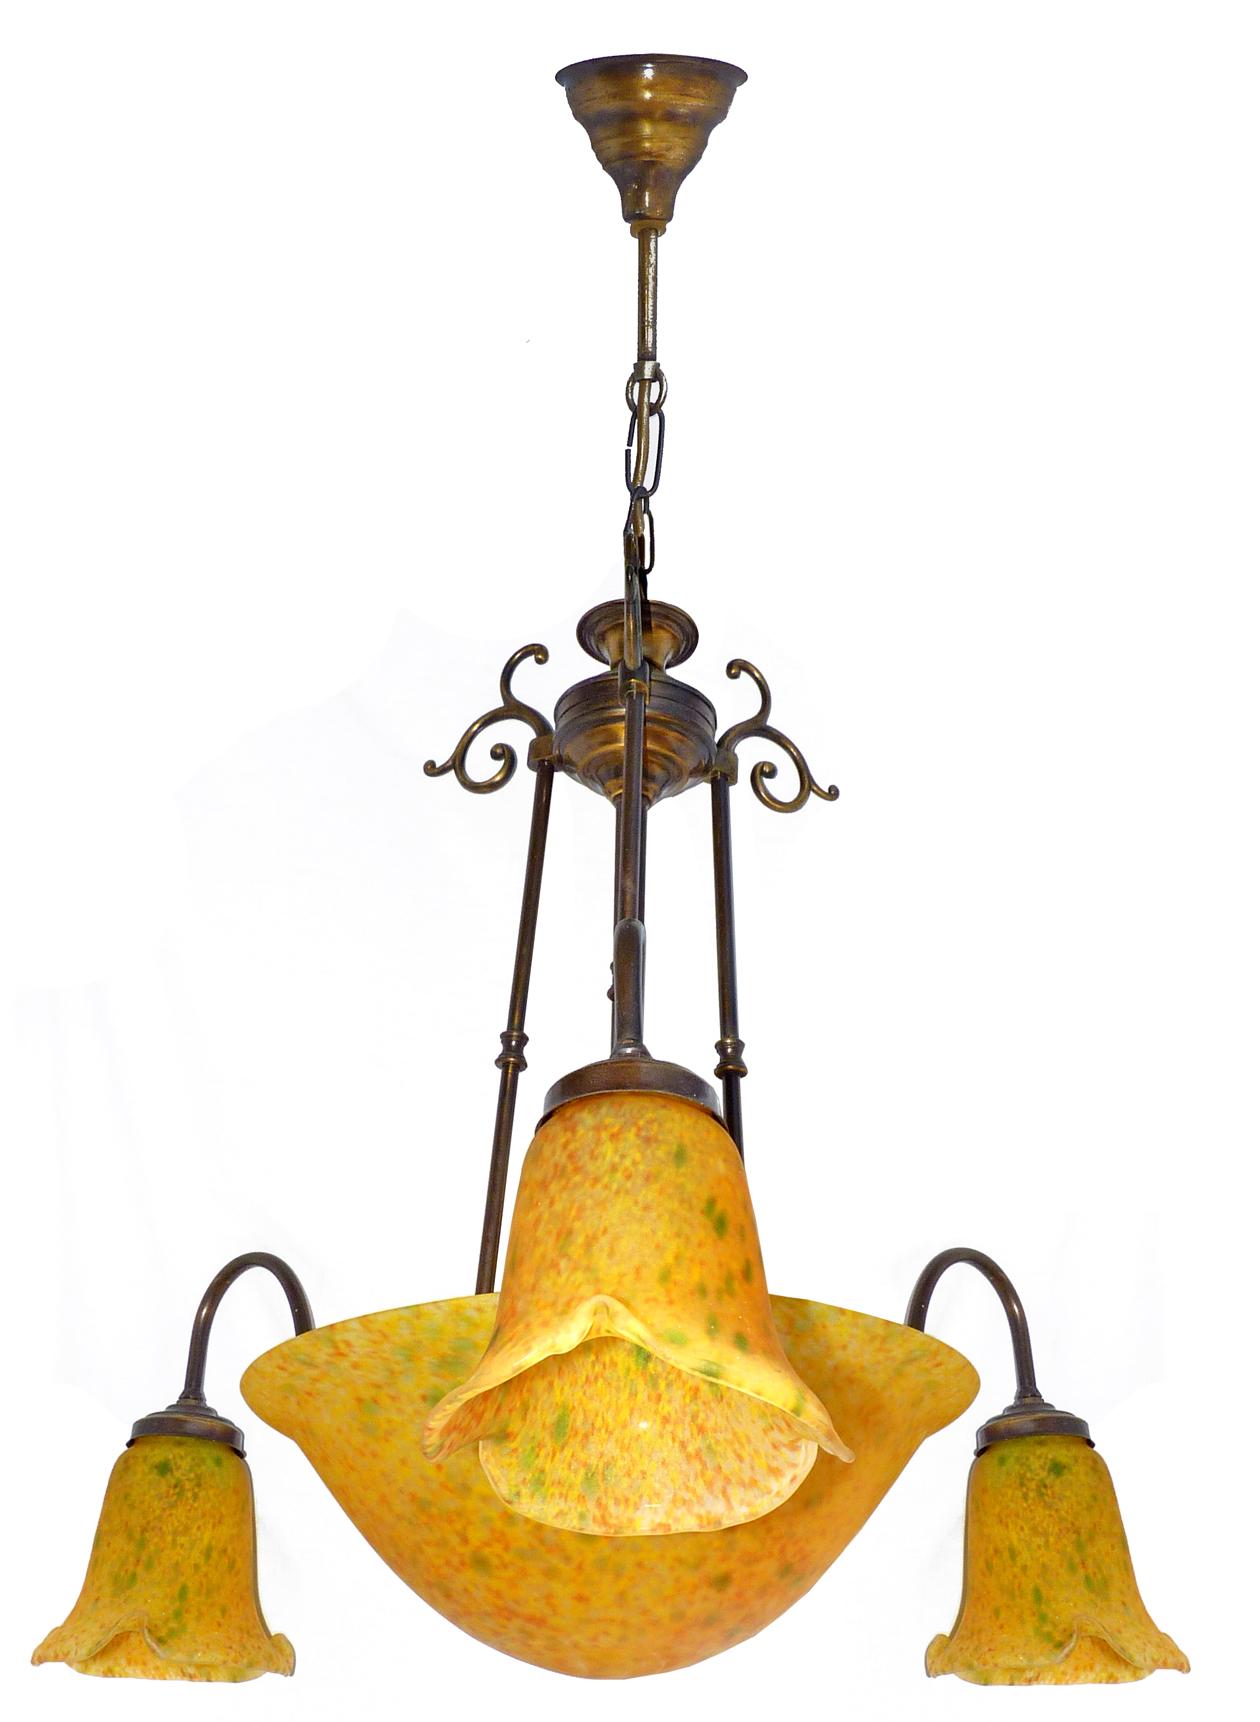 French Art Deco and Art Nouveau Polychrome Amber Glass 4-Light Chandelier In Good Condition For Sale In Coimbra, PT